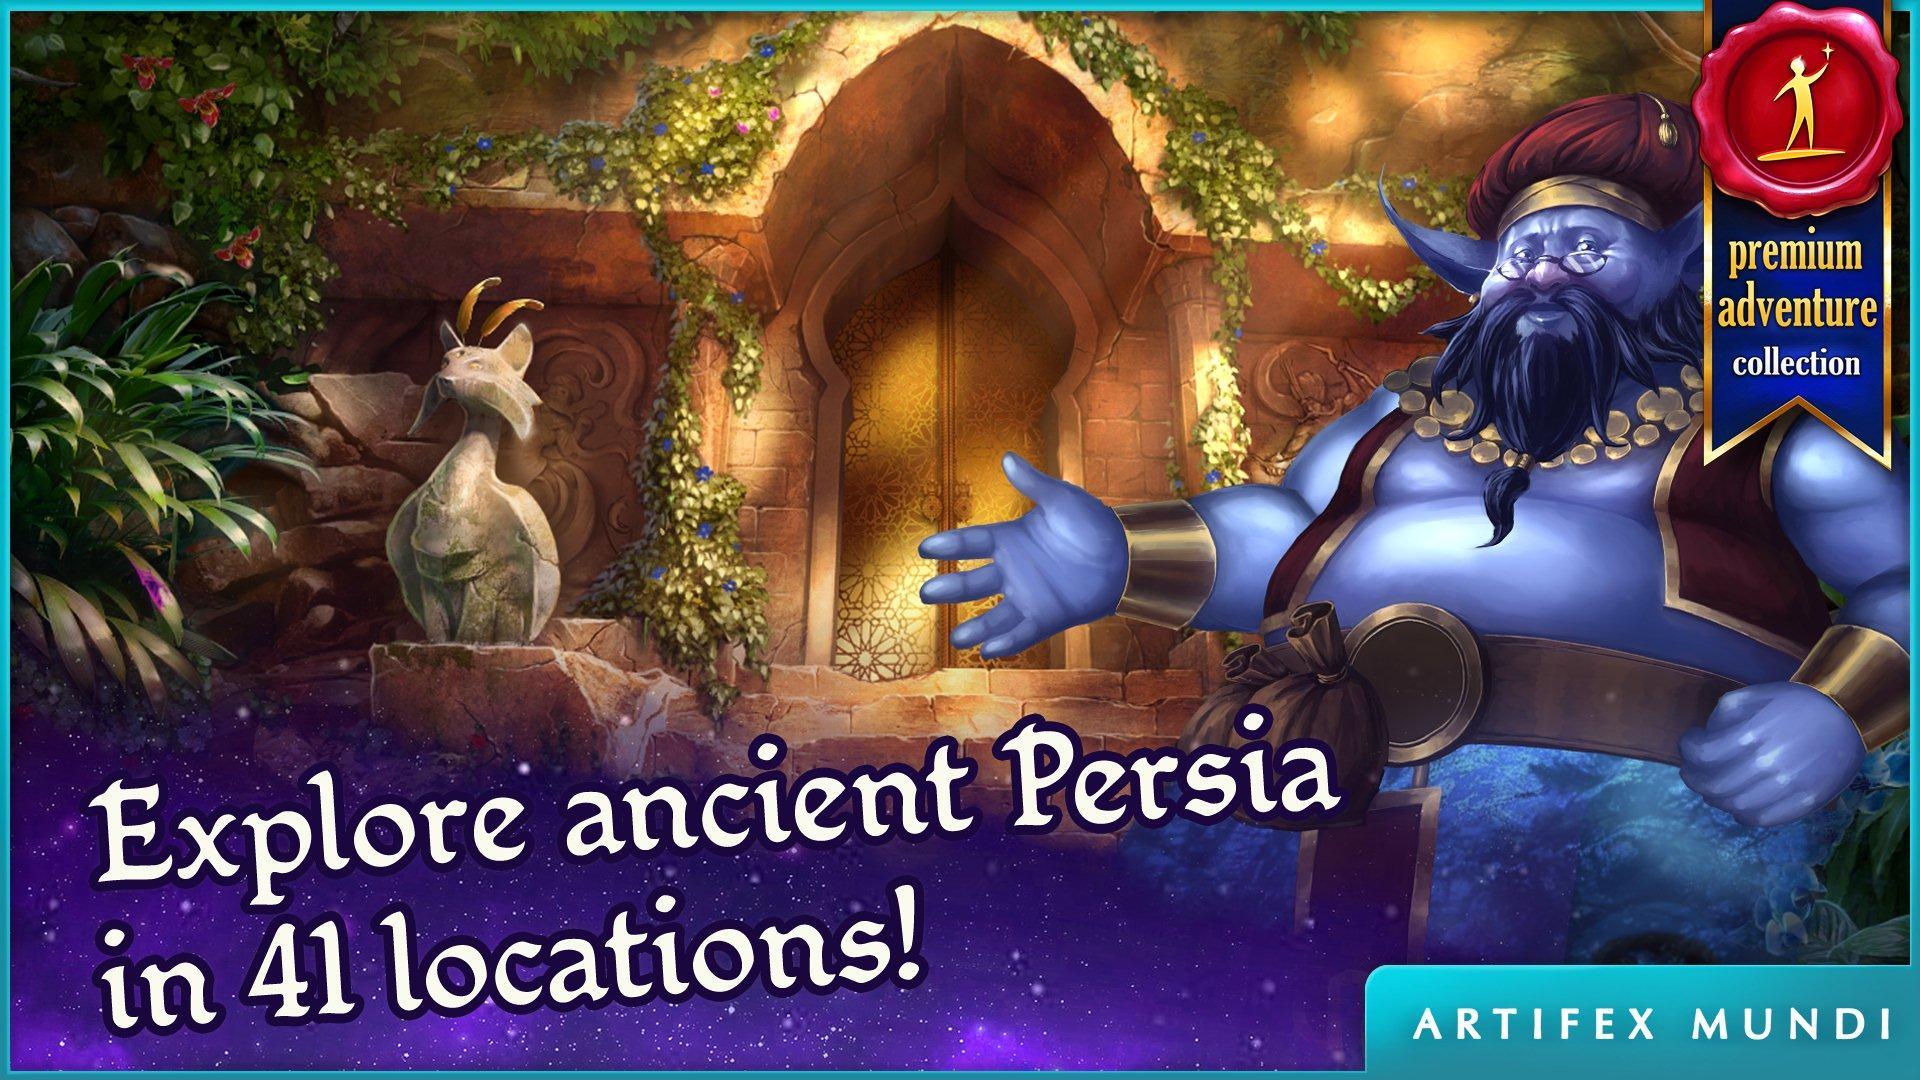 Persian Nights for Android - APK Download - 